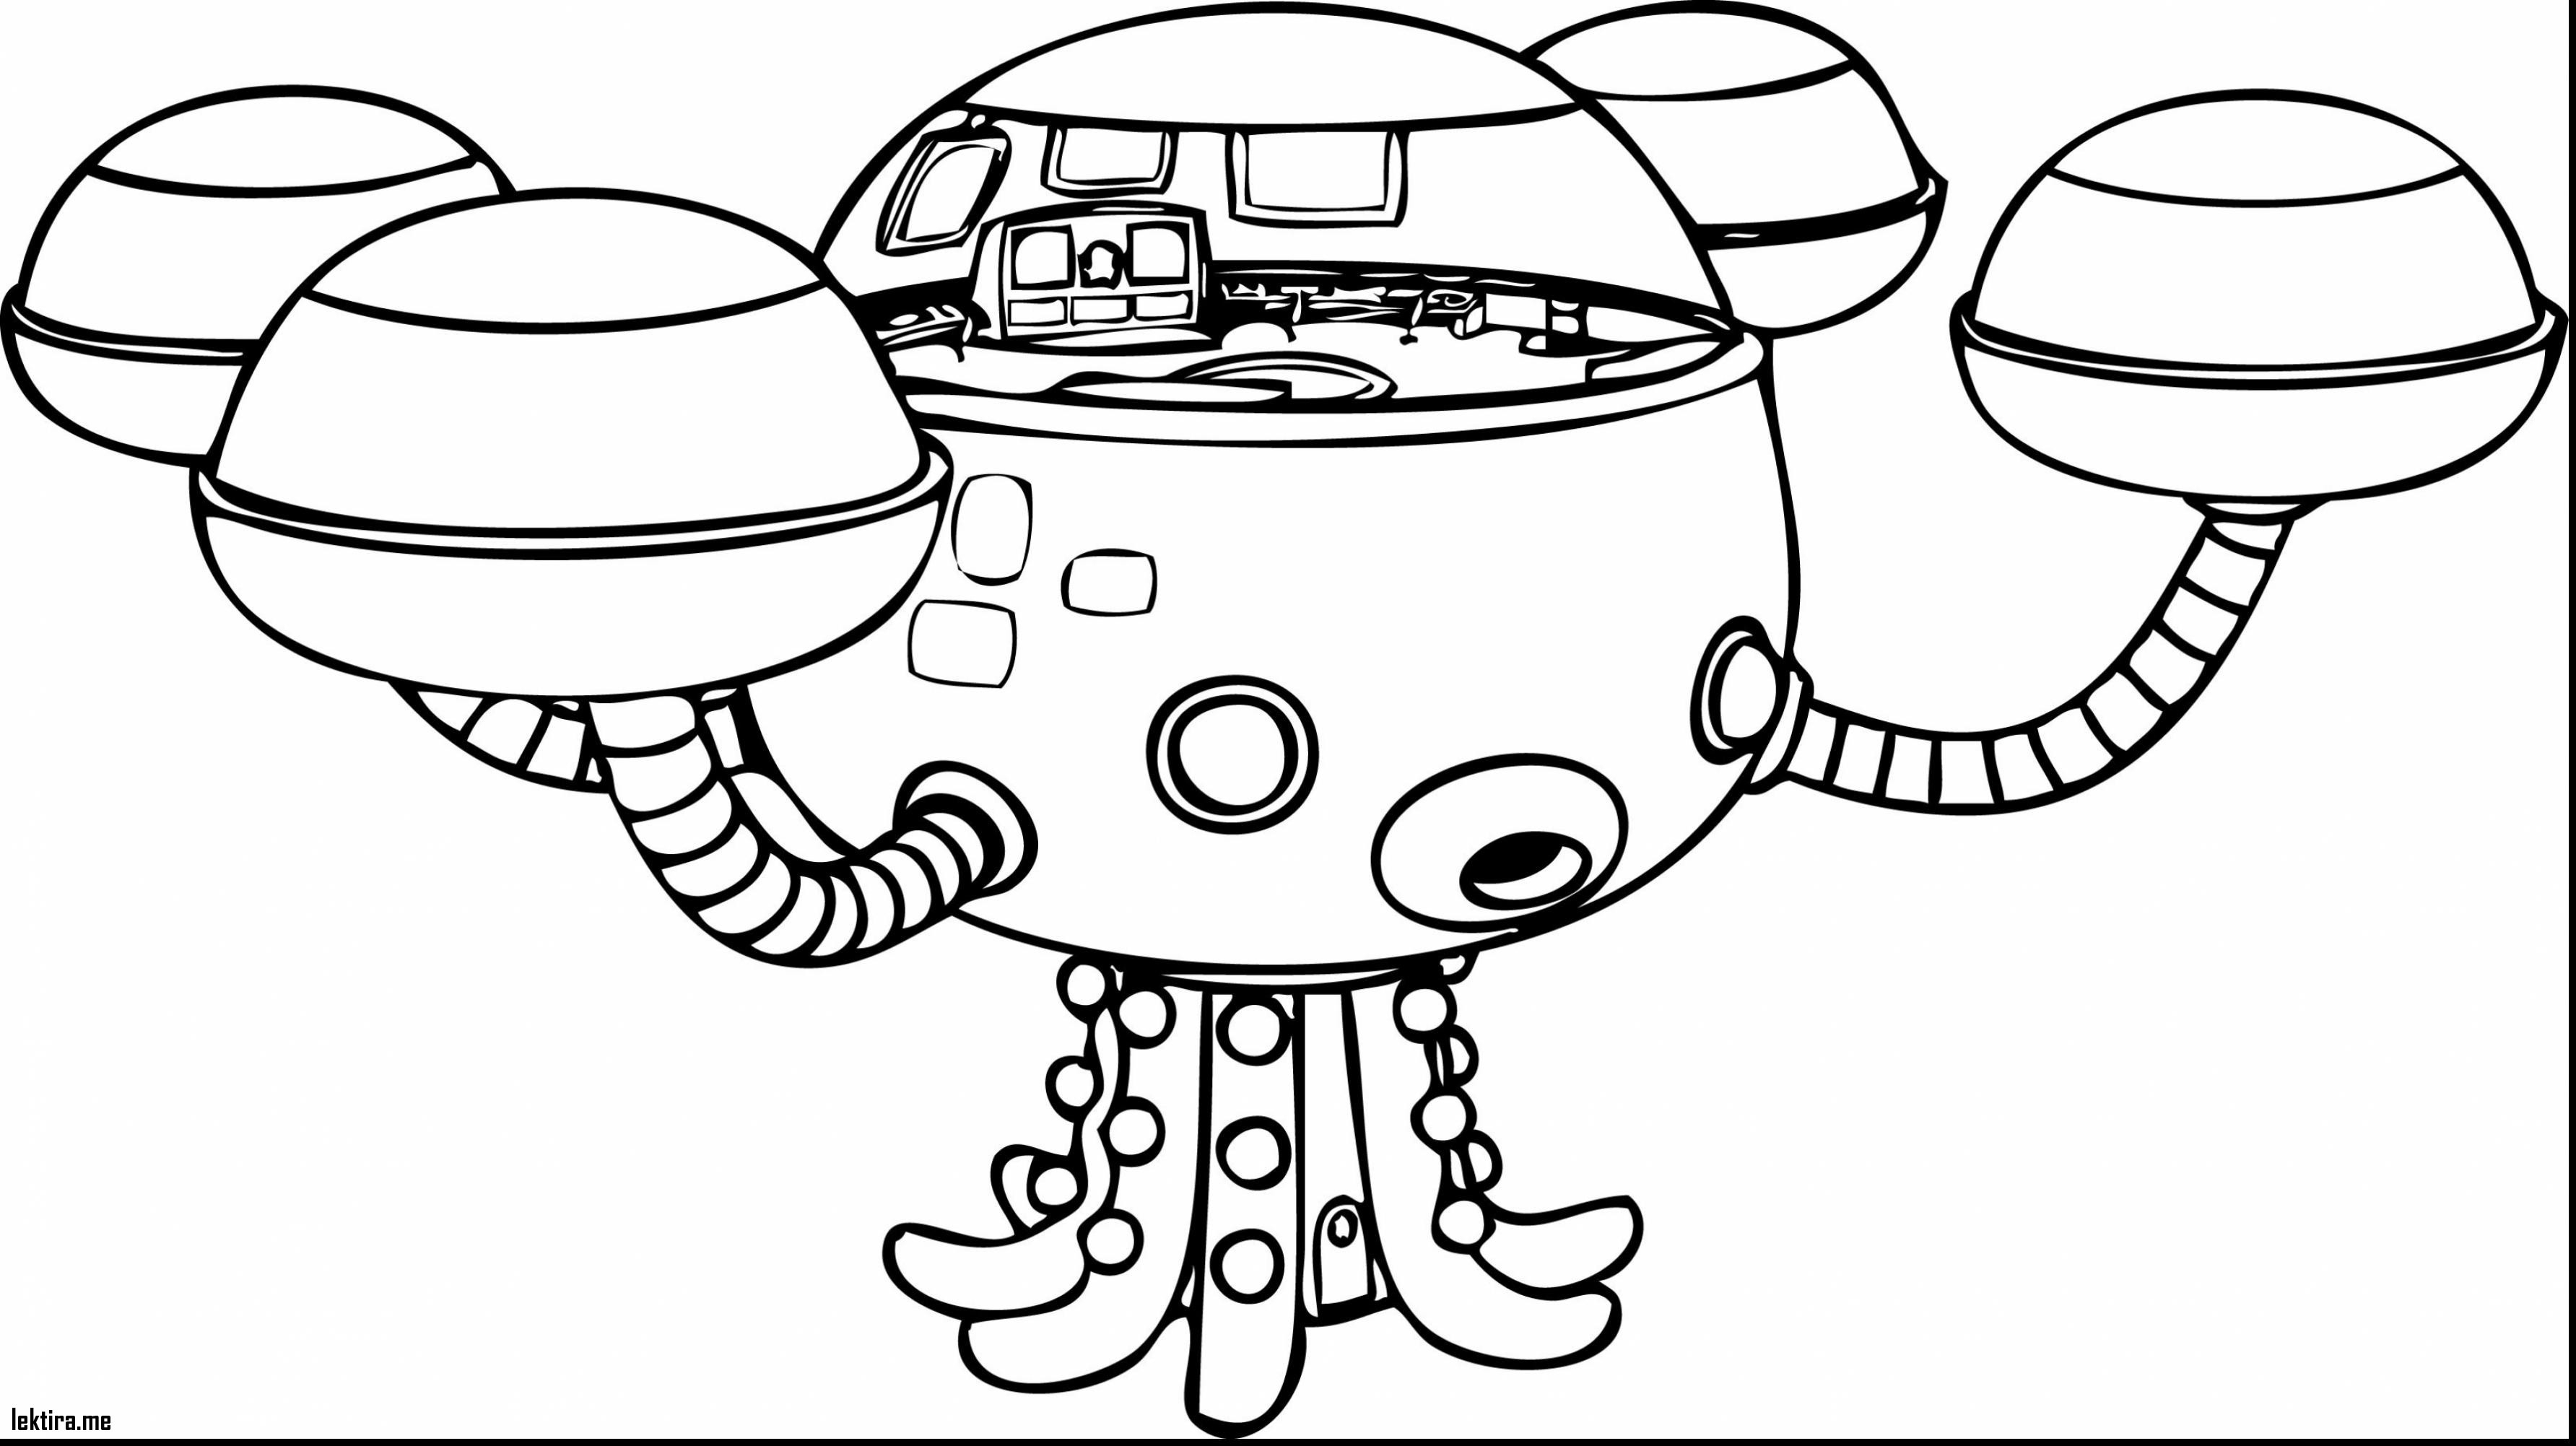 Octonauts Coloring Pages Printable Octonauts Coloring Pages Monesmapyrene